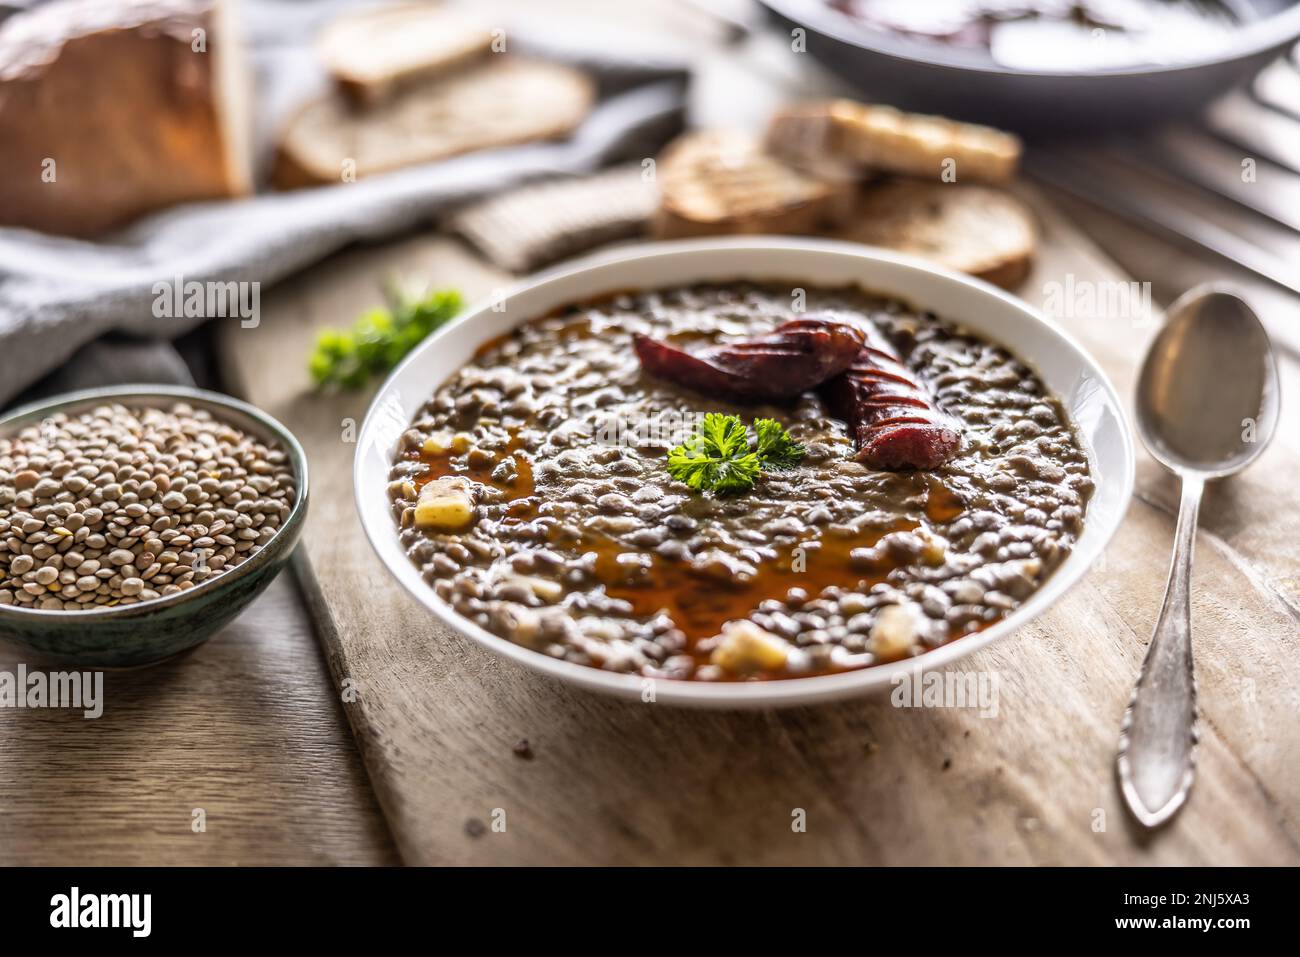 A plate full of lentil legume soup with baked sausage and fresh bread. Stock Photo